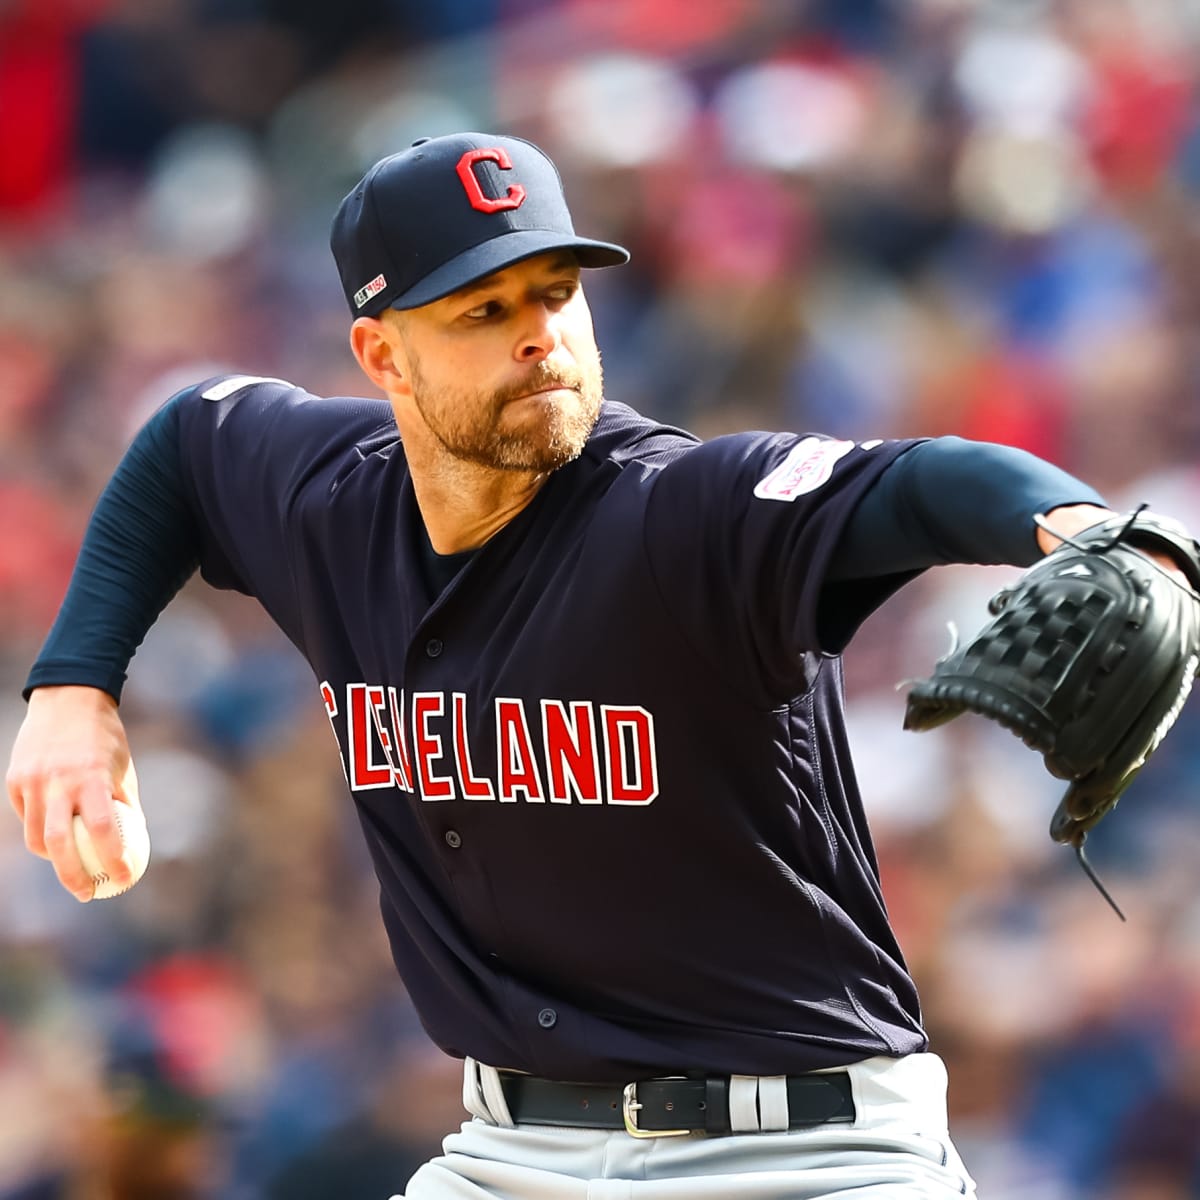 Coppell's Corey Kluber throws no hitter against Texas Rangers